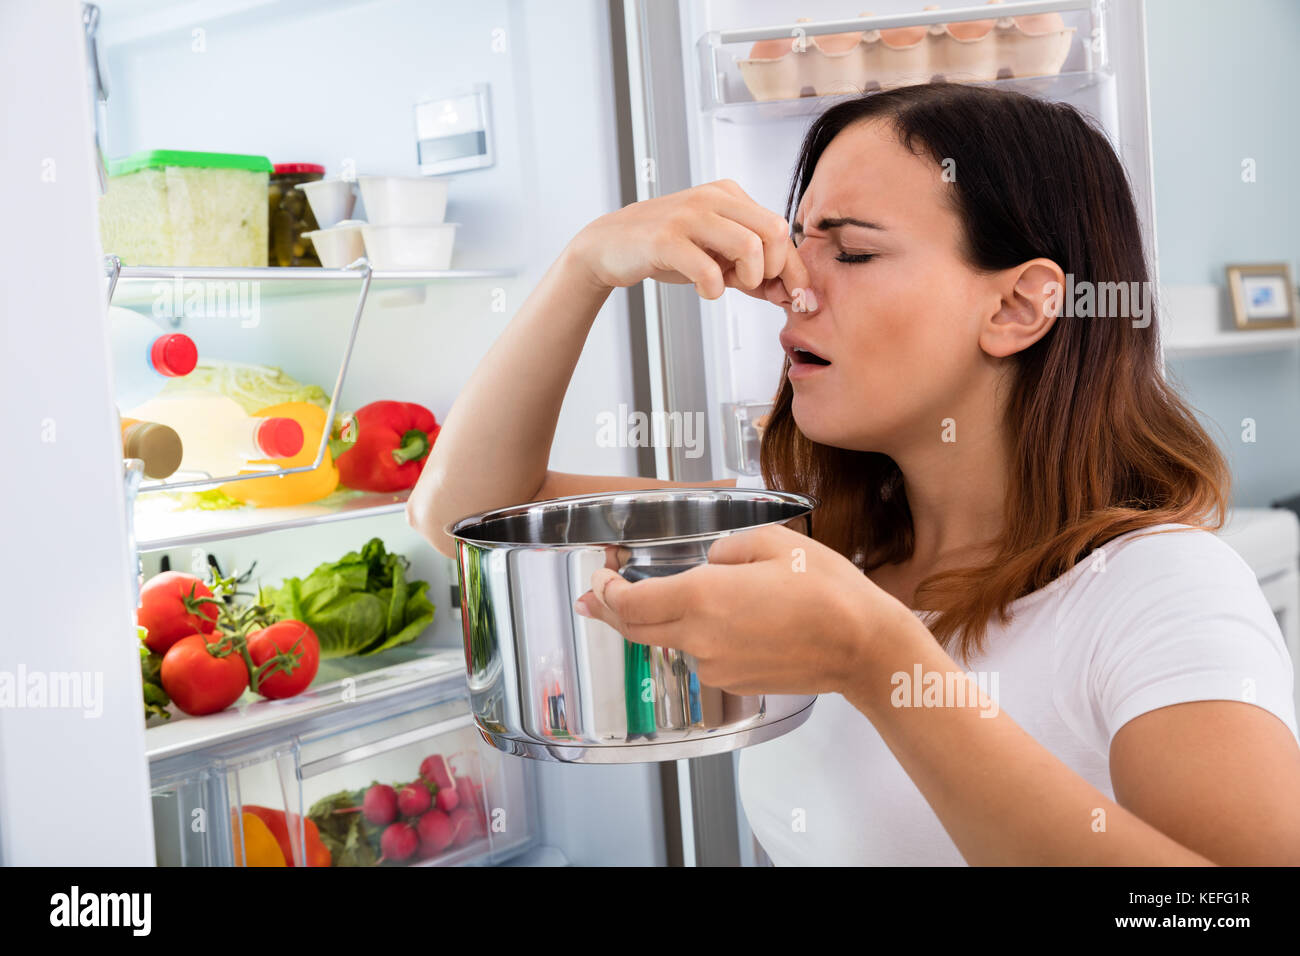 Young Woman Noticed Foul Smell Of Food Near Open Refrigerator Stock Photo